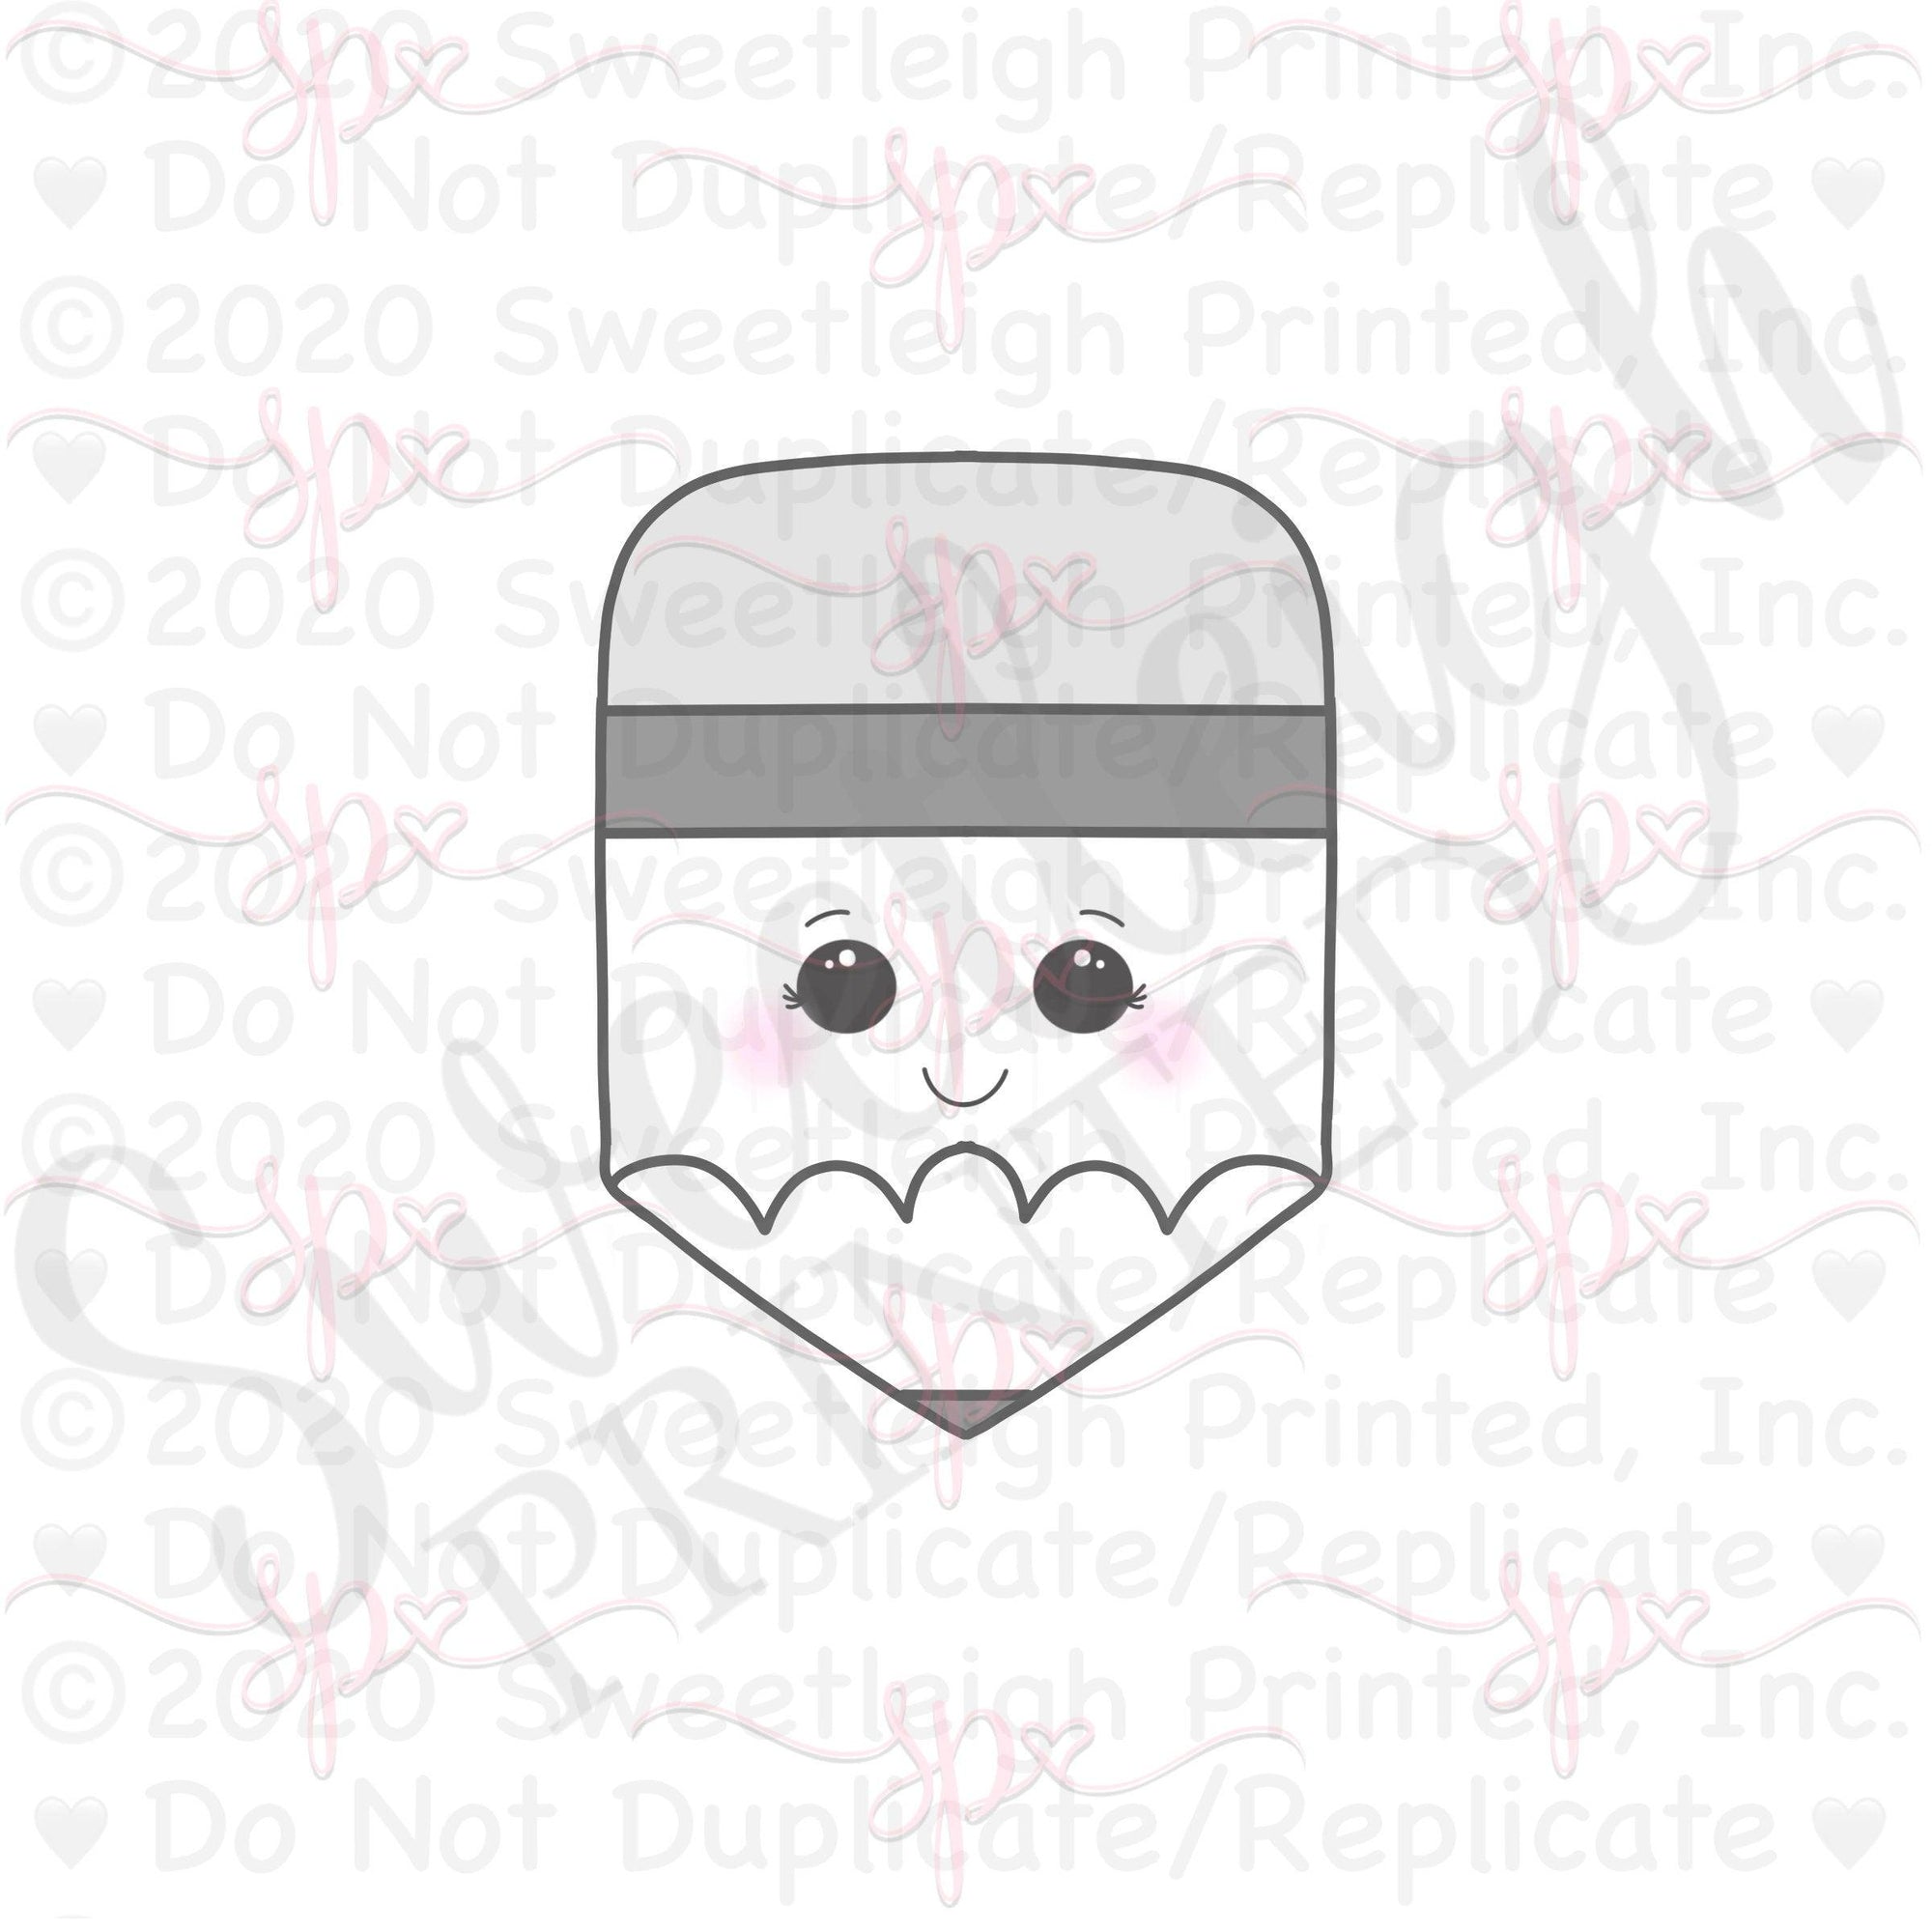 Chubby Pencil 2019 Cookie Cutter - Sweetleigh 